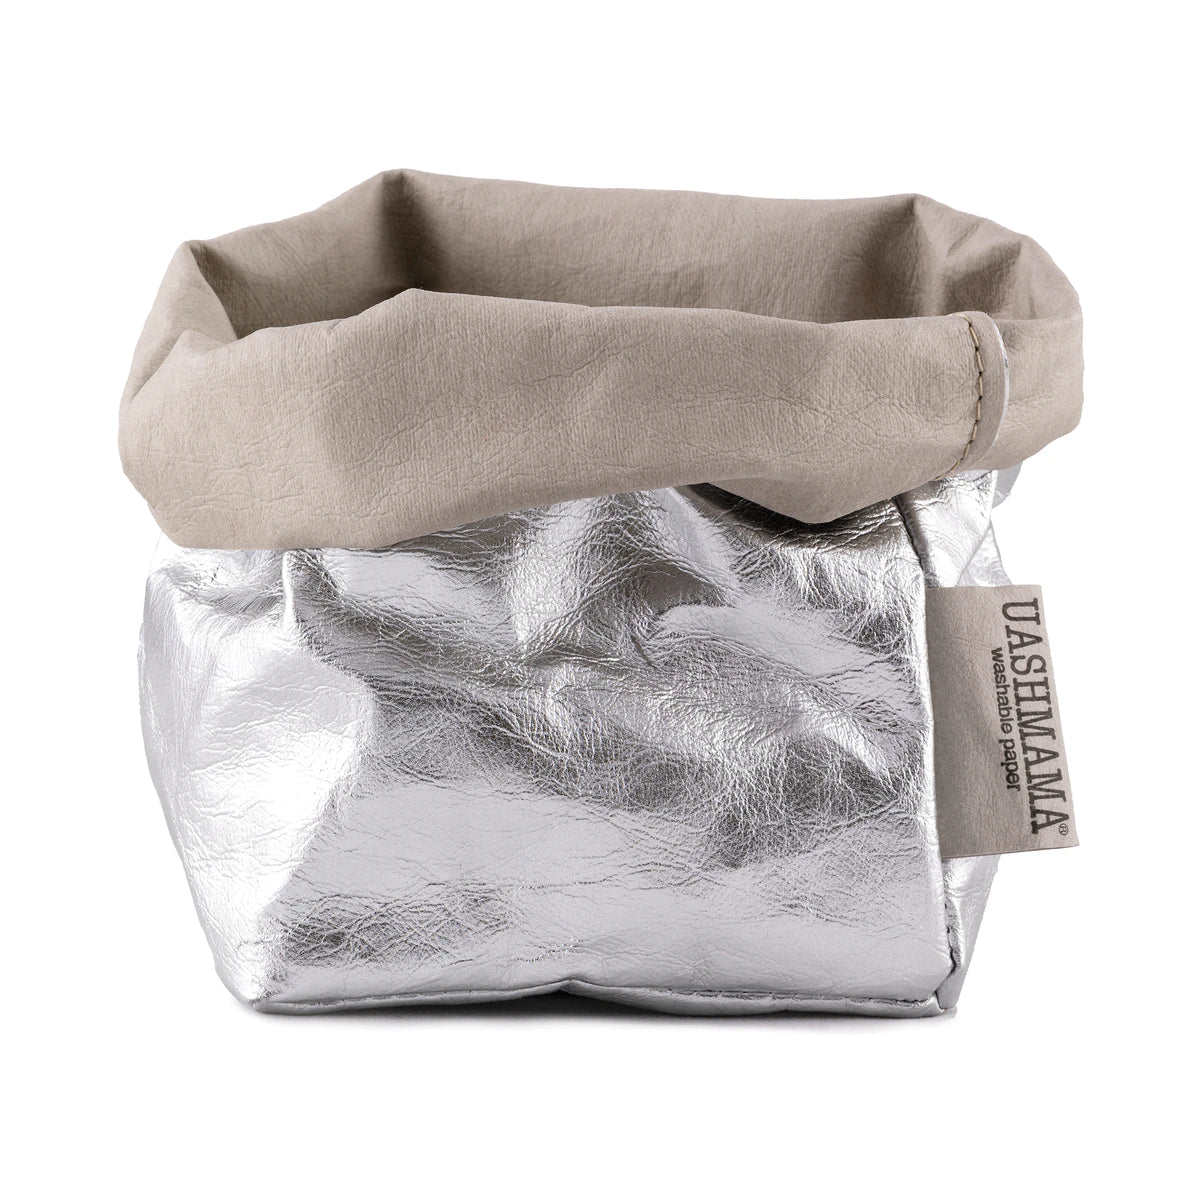 A washable paper bag is shown. The bag is rolled down at the top and features a UASHMAMA logo label on the bottom left corner. The bag pictured is the small size in metallic silver.